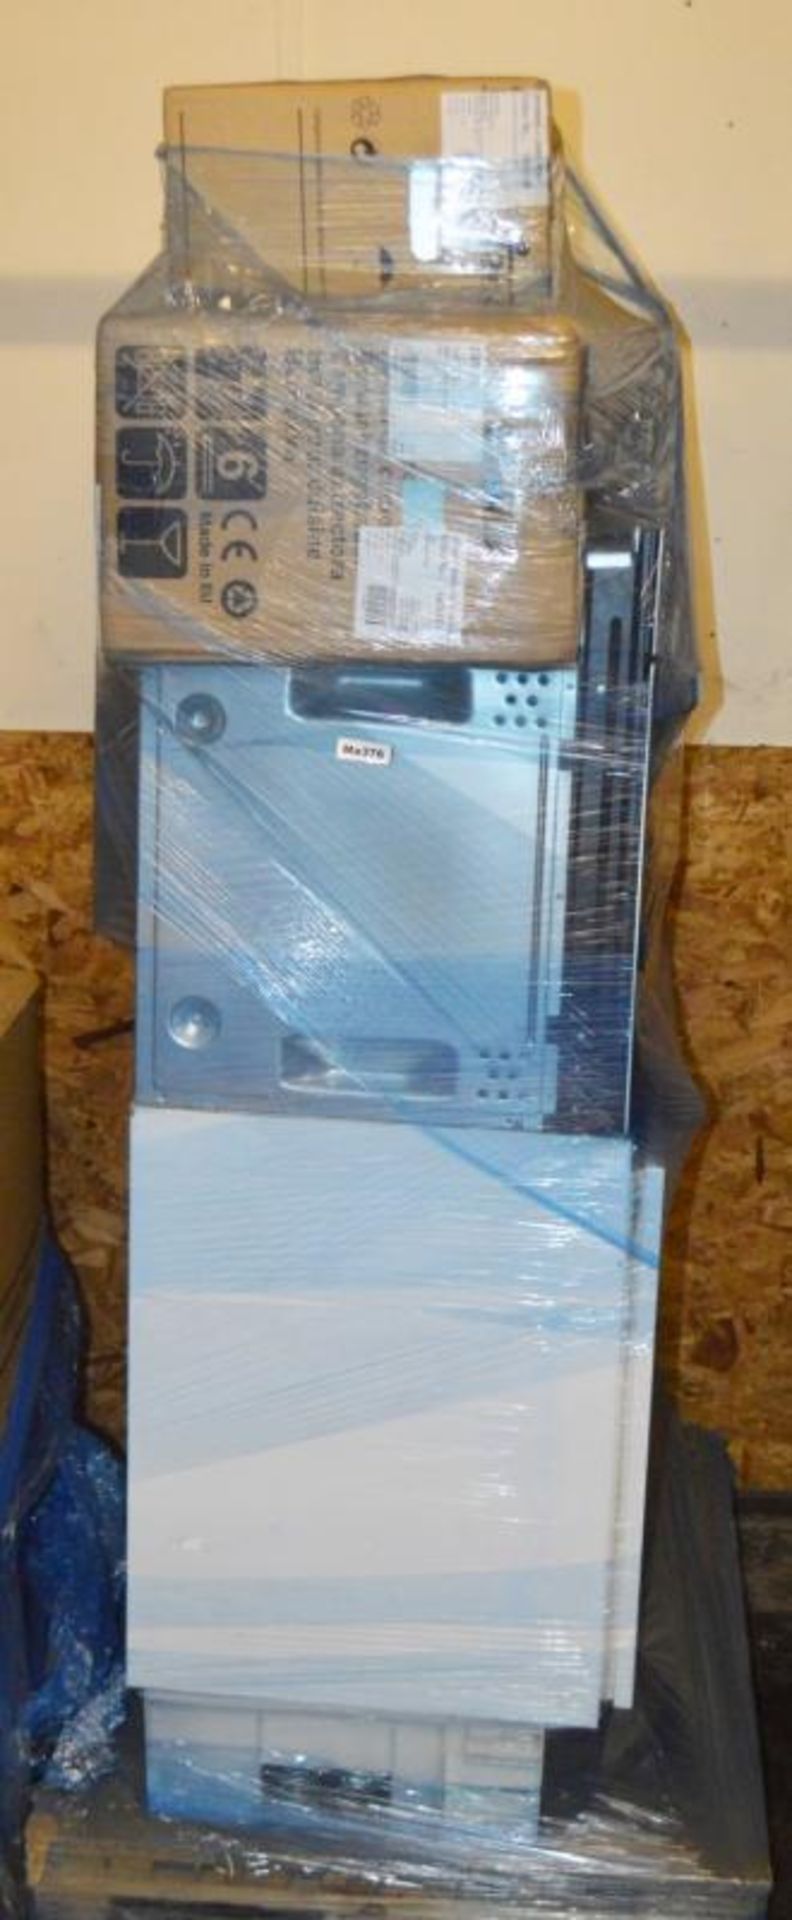 1 x Pallet of Assorted Domestic Appliances - Includes 7 x items Including Prima Ovens, Cooker Hoods